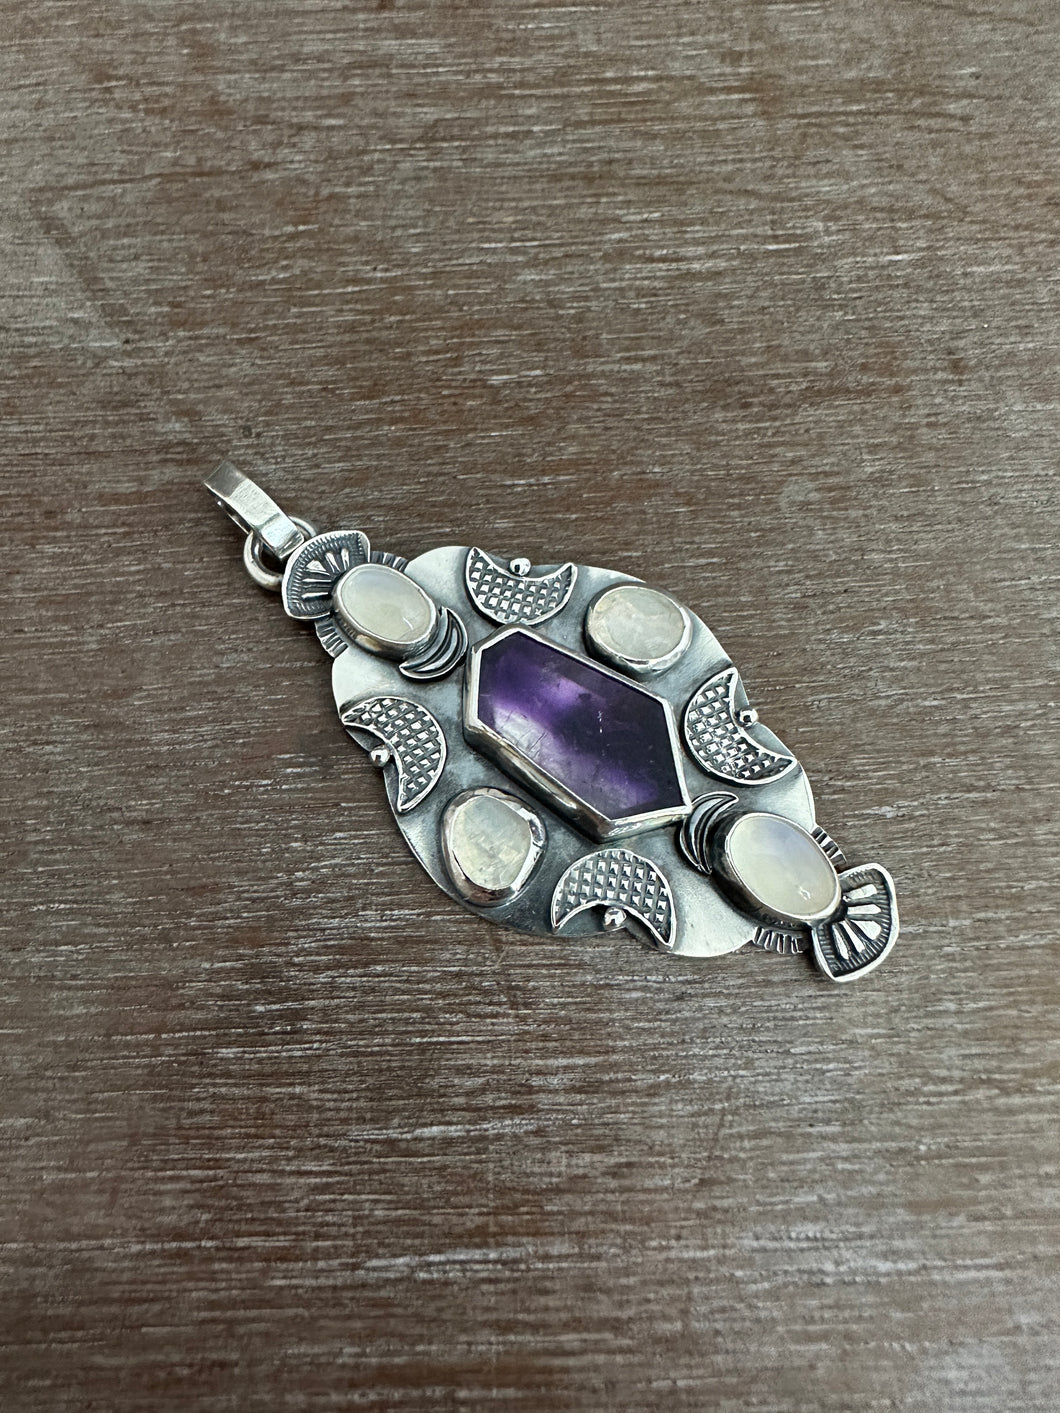 Melody Stone and Moonstones Pendant